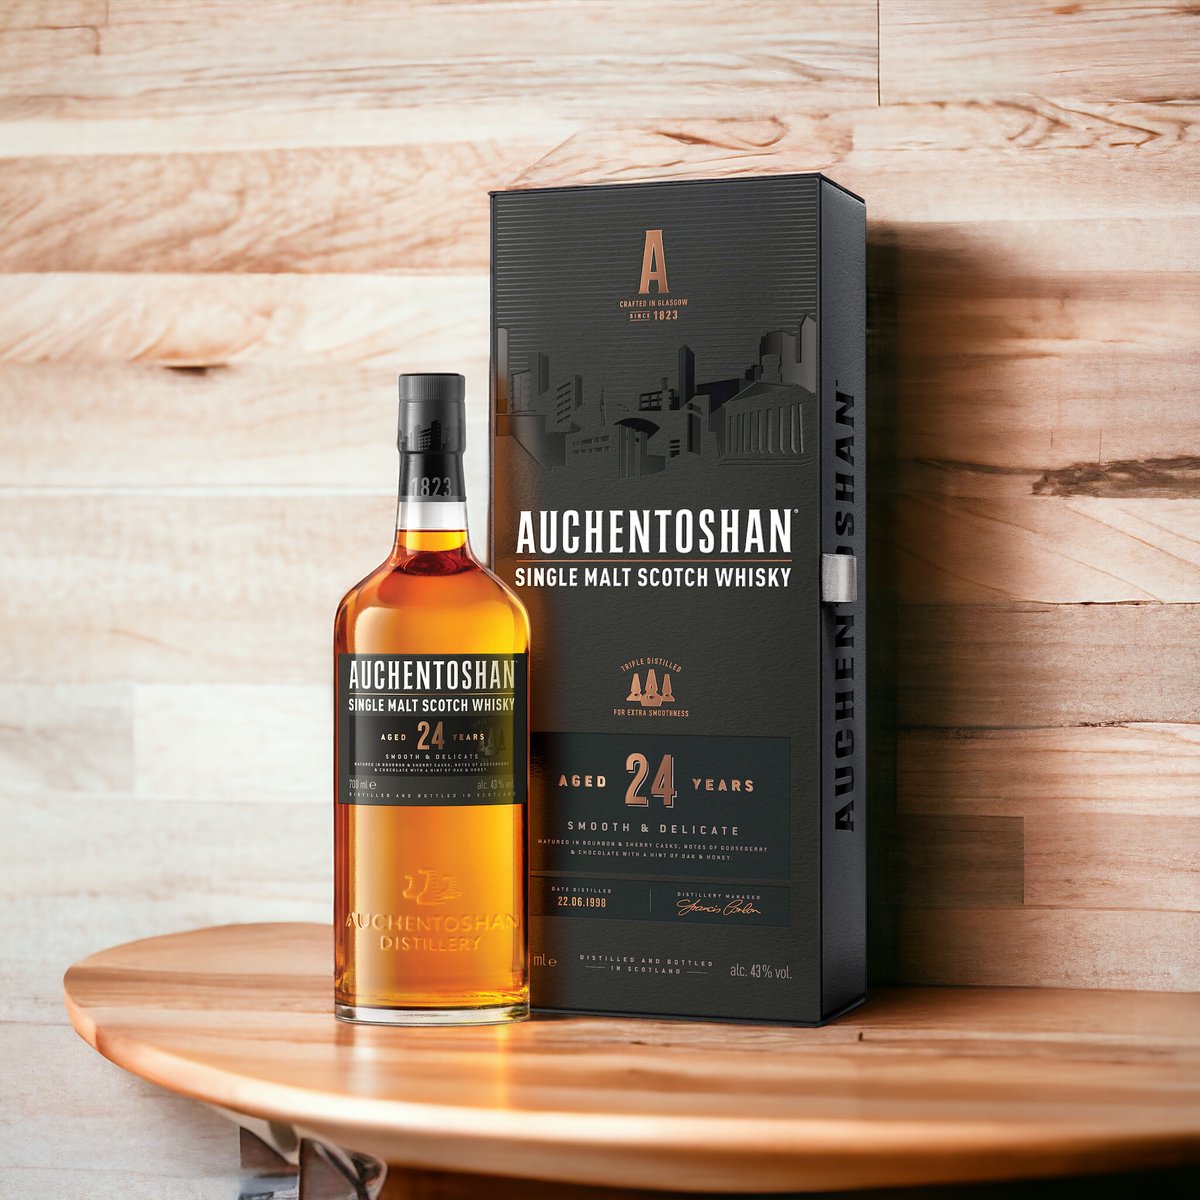 New Release Alert! To Celebrate 200 Years Since Its Establishment In 1823 Beam Suntory’s Lowland Distillery Auchentoshan Has Released A 24 Year Old Single Malt. A Fine Addition For Any Scotland Single Malt Whisky Lover!